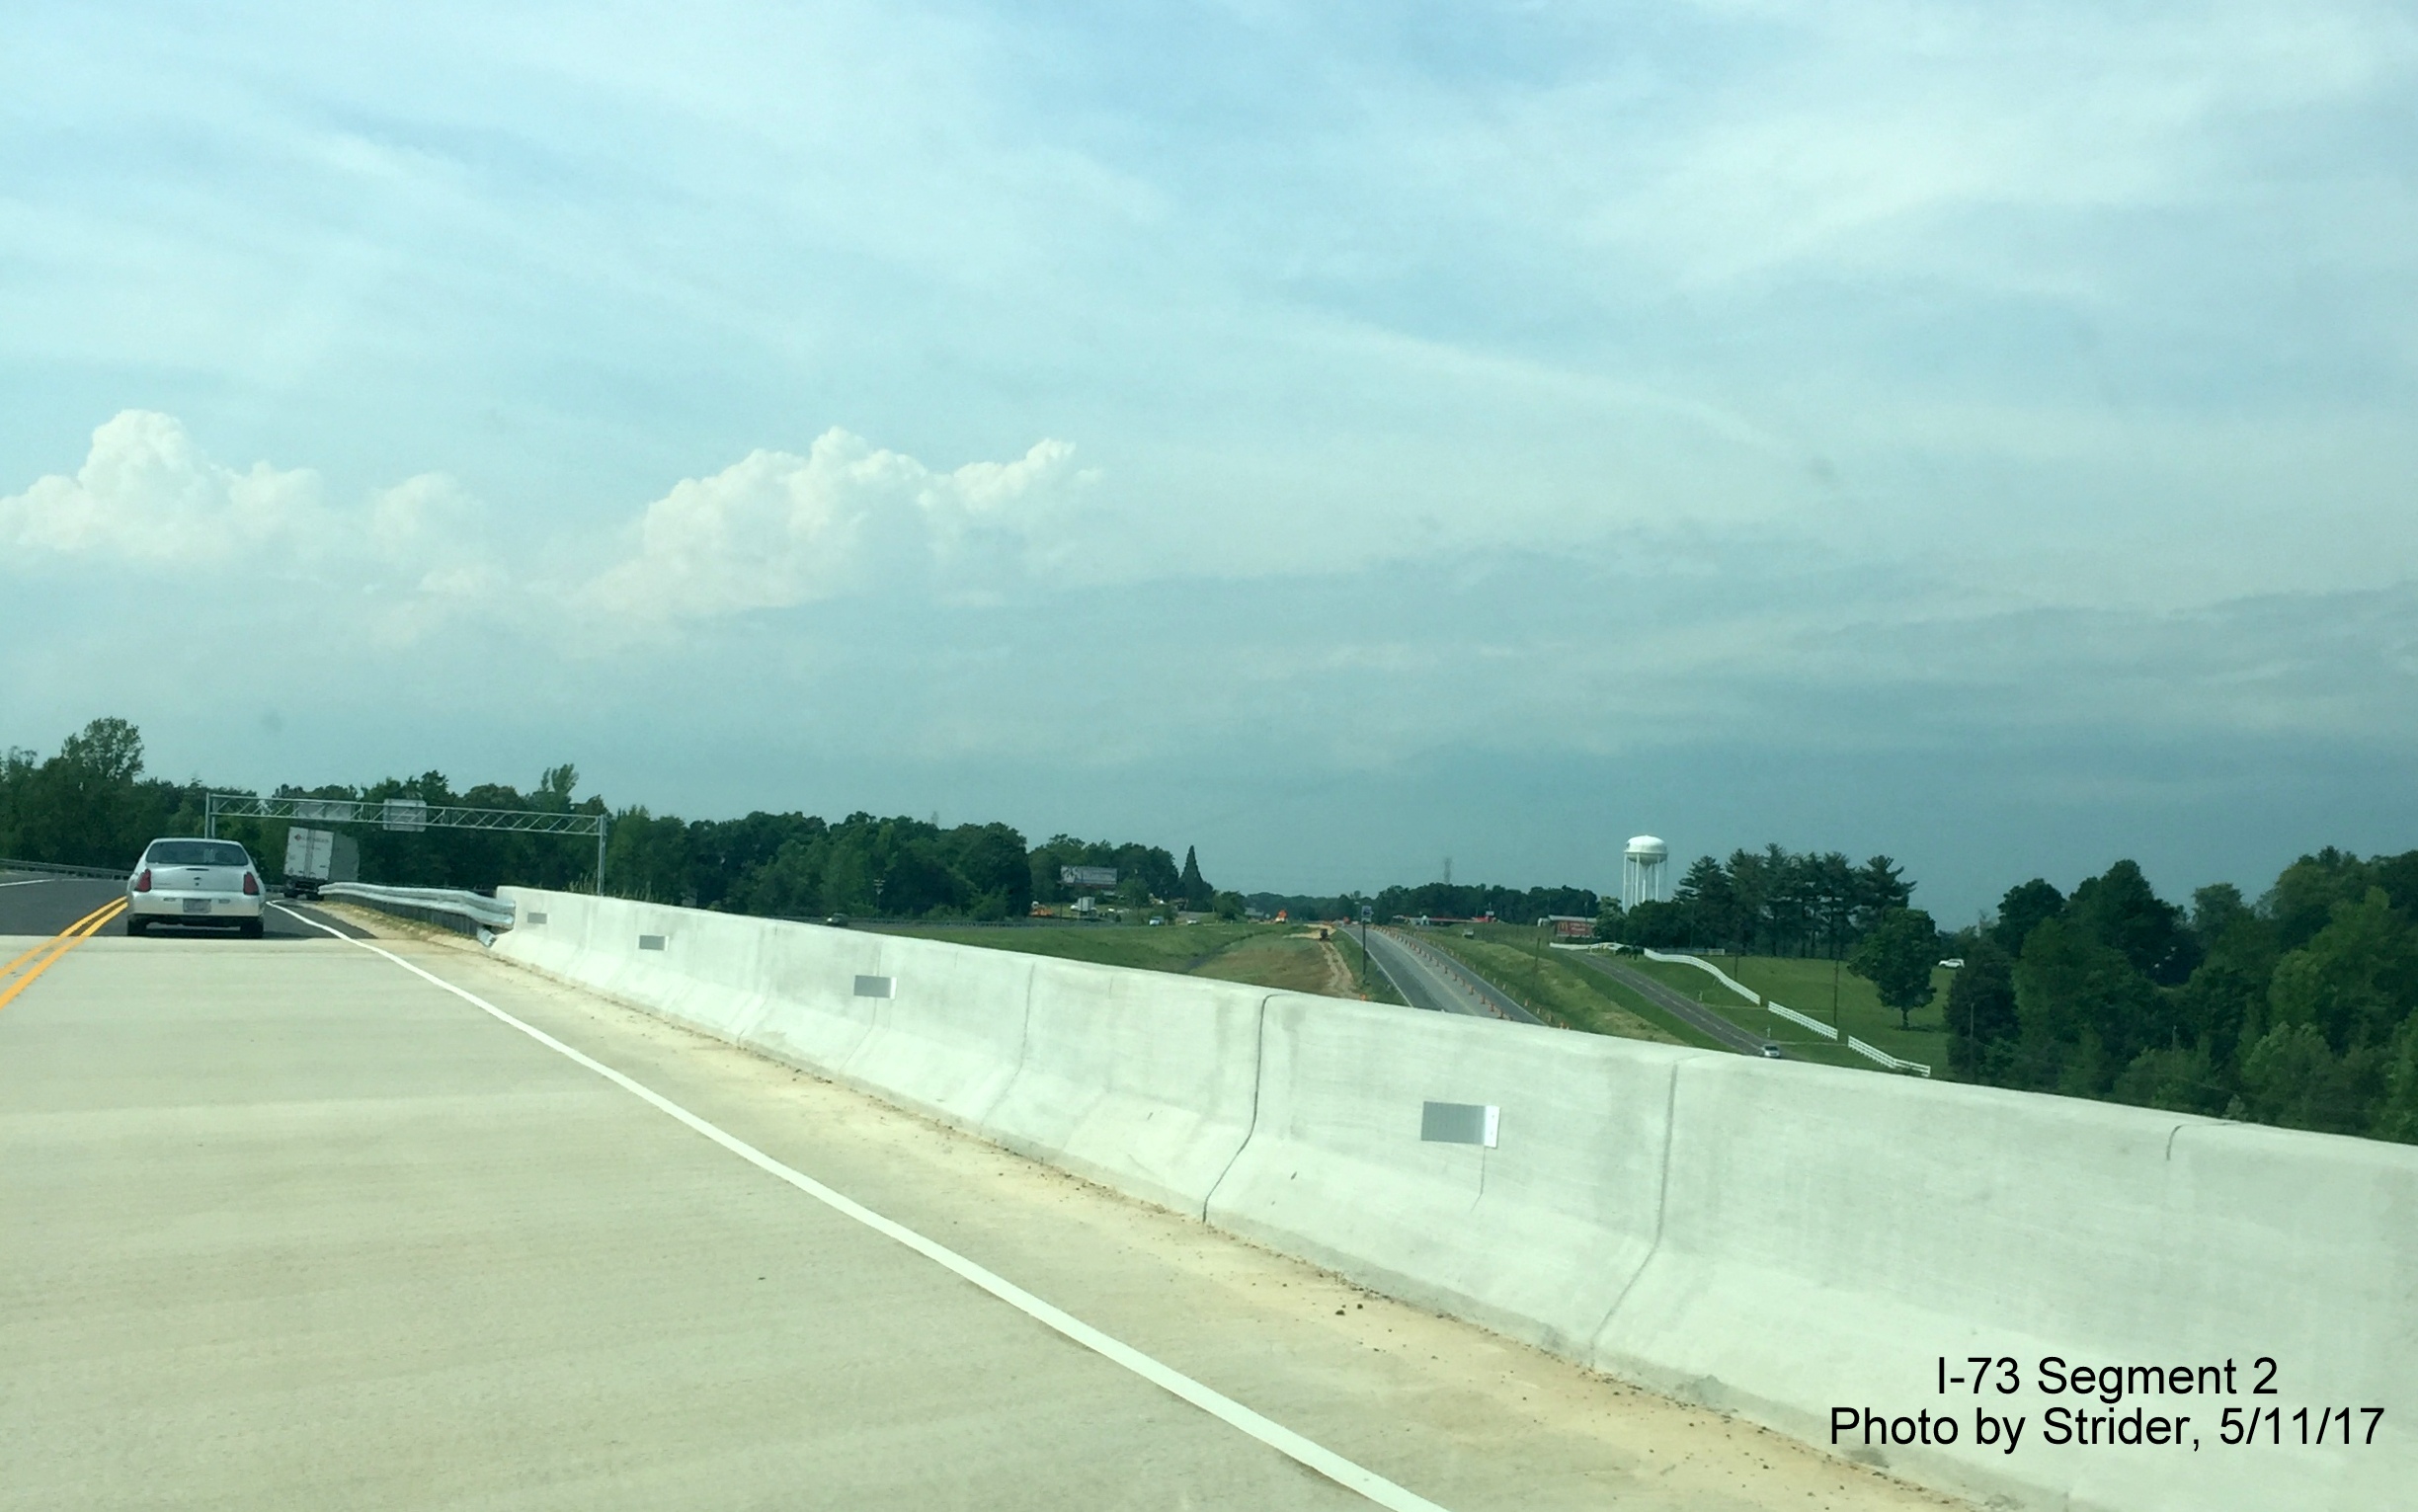 Image from recently opened bridge over NC 68 from US 220 North using Future I-73 South lanes, from Strider